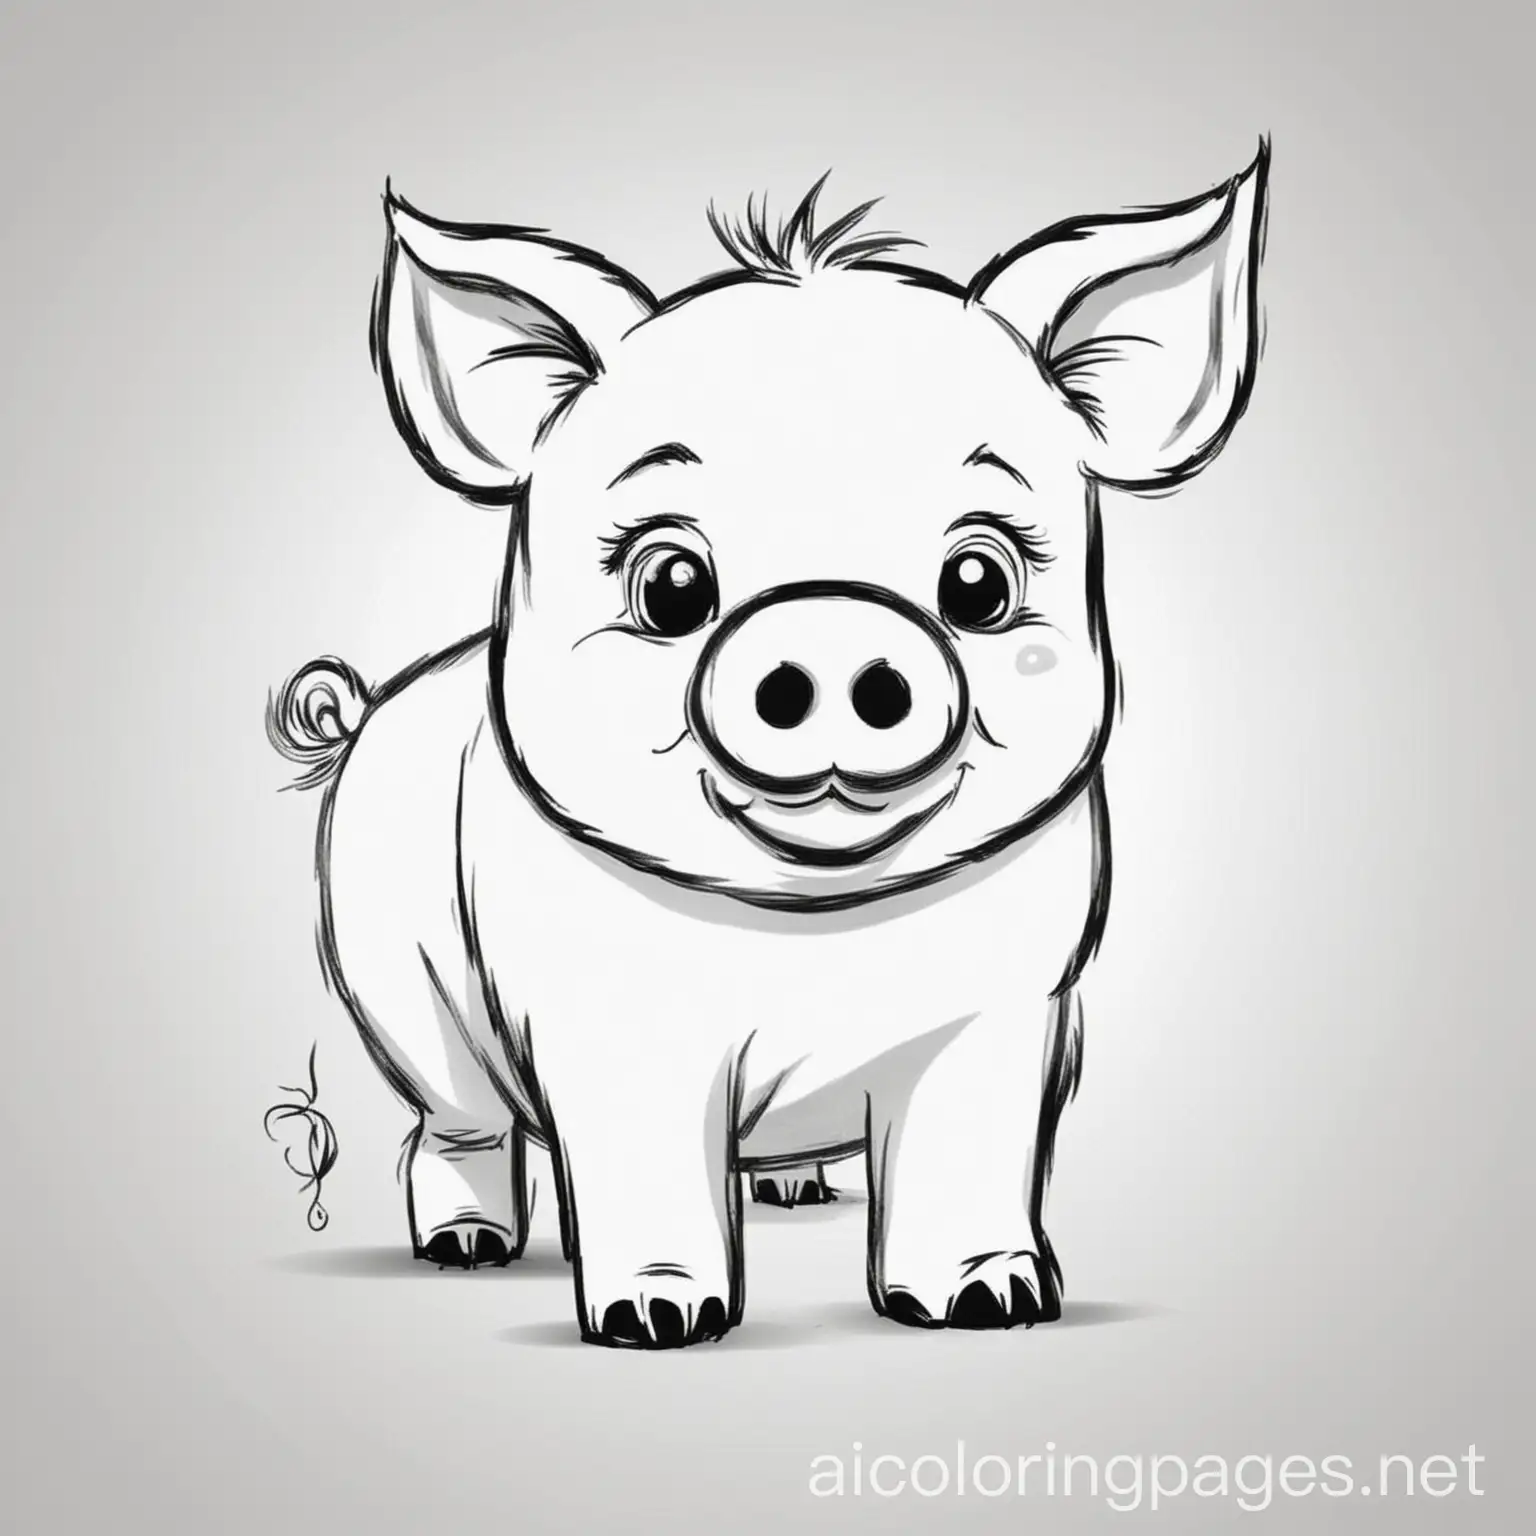 Simple-Pig-Coloring-Page-Black-and-White-Line-Art-for-Kids